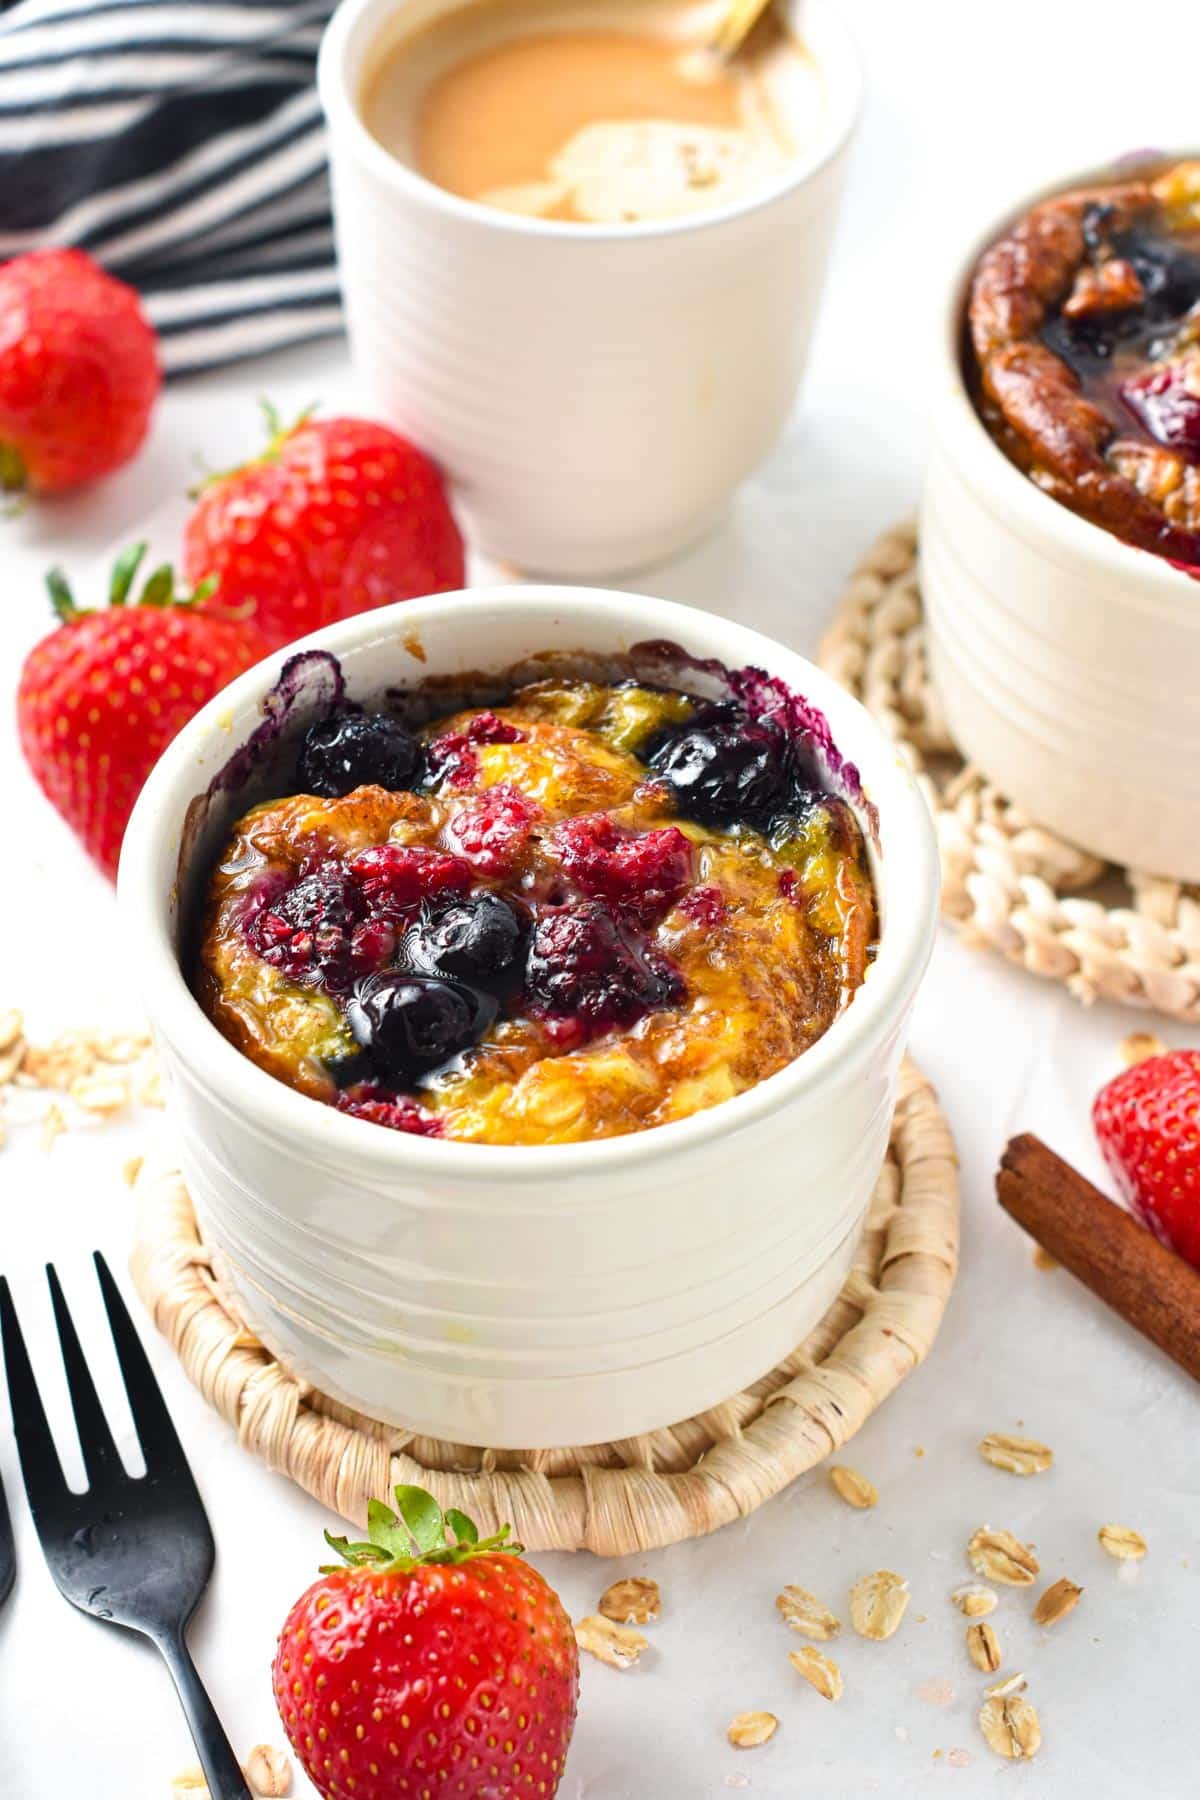 This Single Serve Baked Oatmeal recipe is an easy healthy baked oatmeal recipe for one, perfect as a quick breakfast for oats lovers.This Single Serve Baked Oatmeal recipe is an easy healthy baked oatmeal recipe for one, perfect as a quick breakfast for oats lovers.